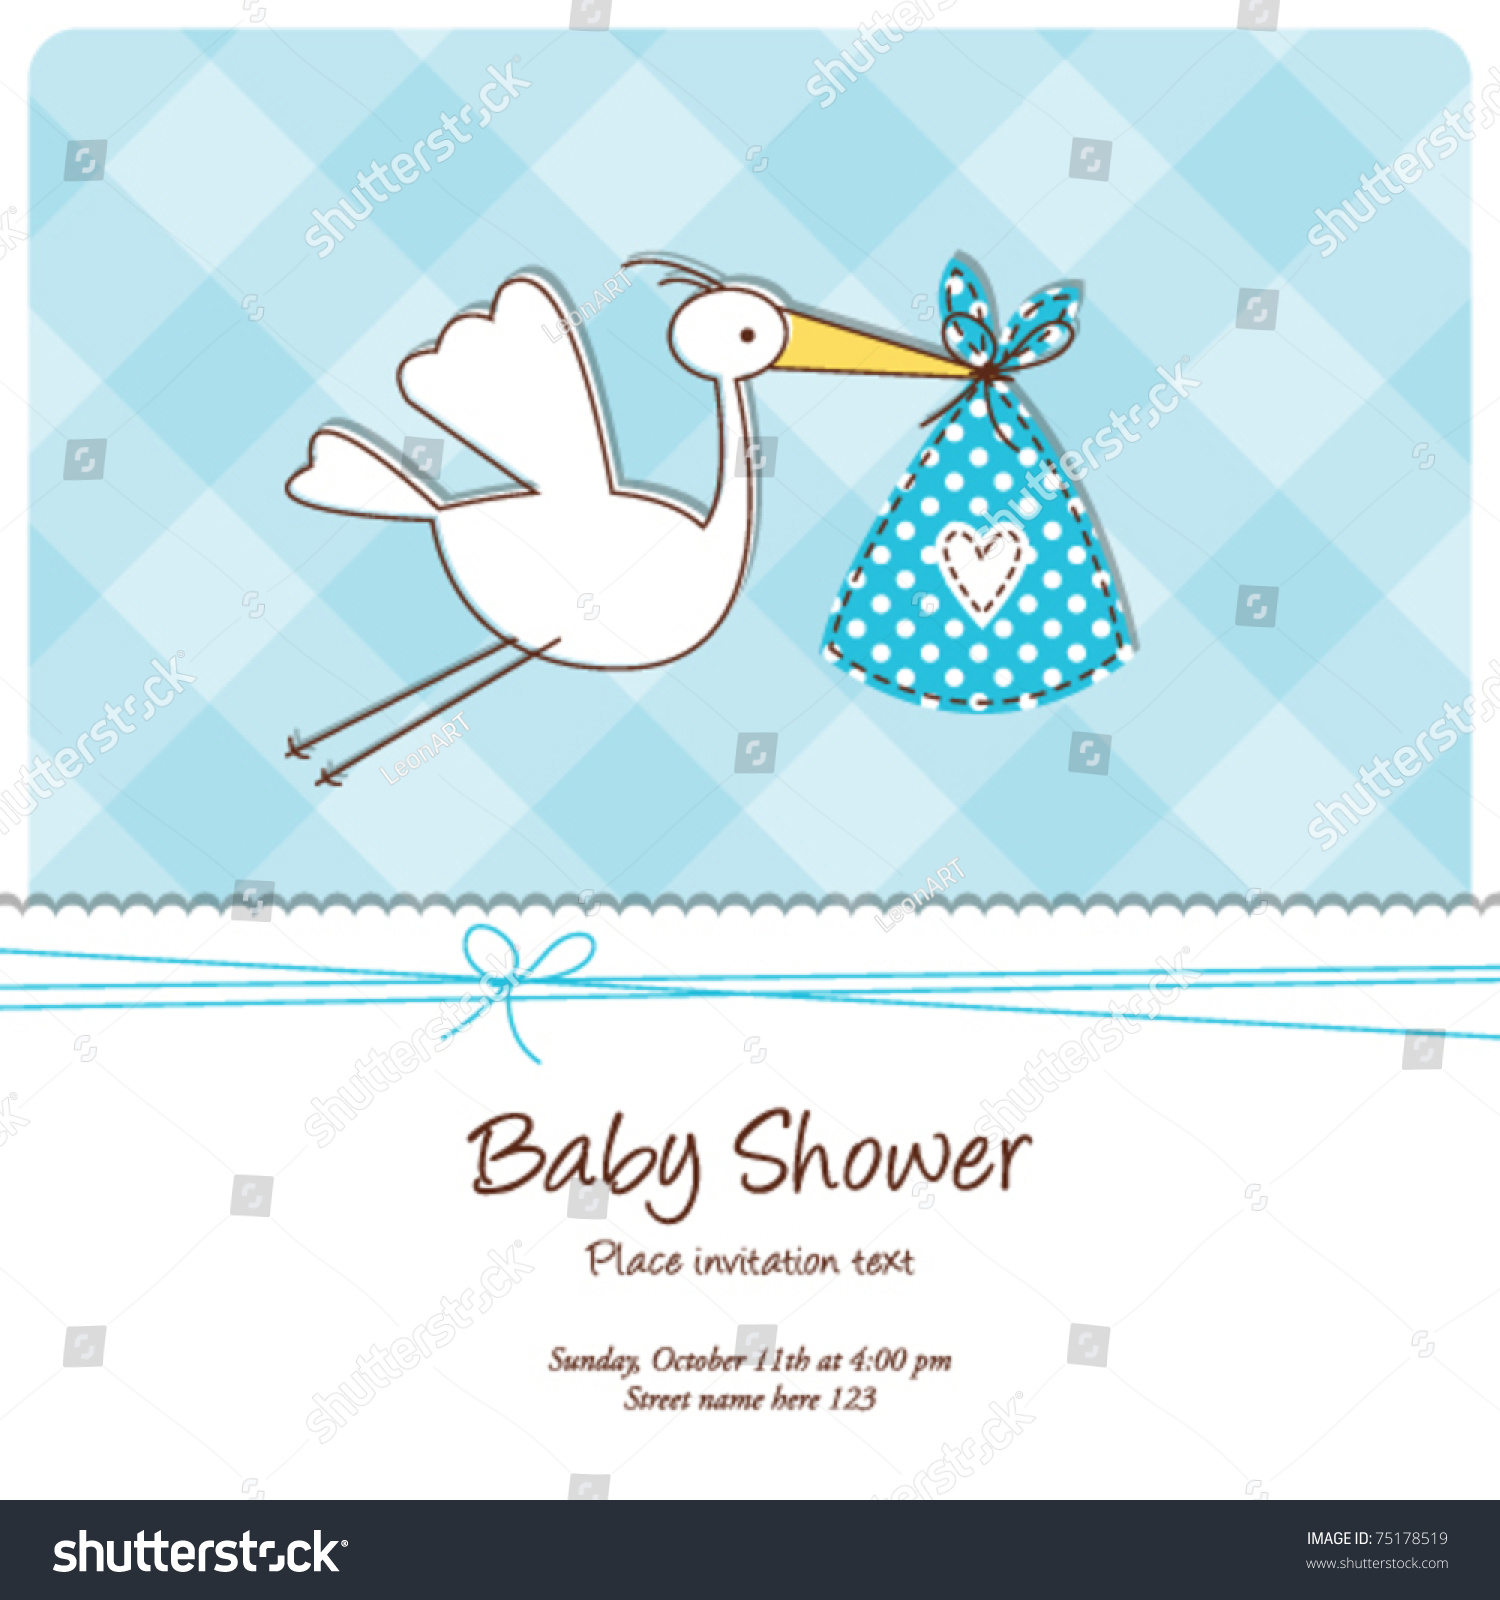 Full Size of Baby Shower:sturdy Baby Shower Invitation Template Image Concepts Baby Shower Invitation Template Arreglos Para Baby Shower Baby Shower Rentals Ideas Para Baby Shower Baby Shower Props Baby Shower Invitation Template Cute Baby Stock Vector 75178519